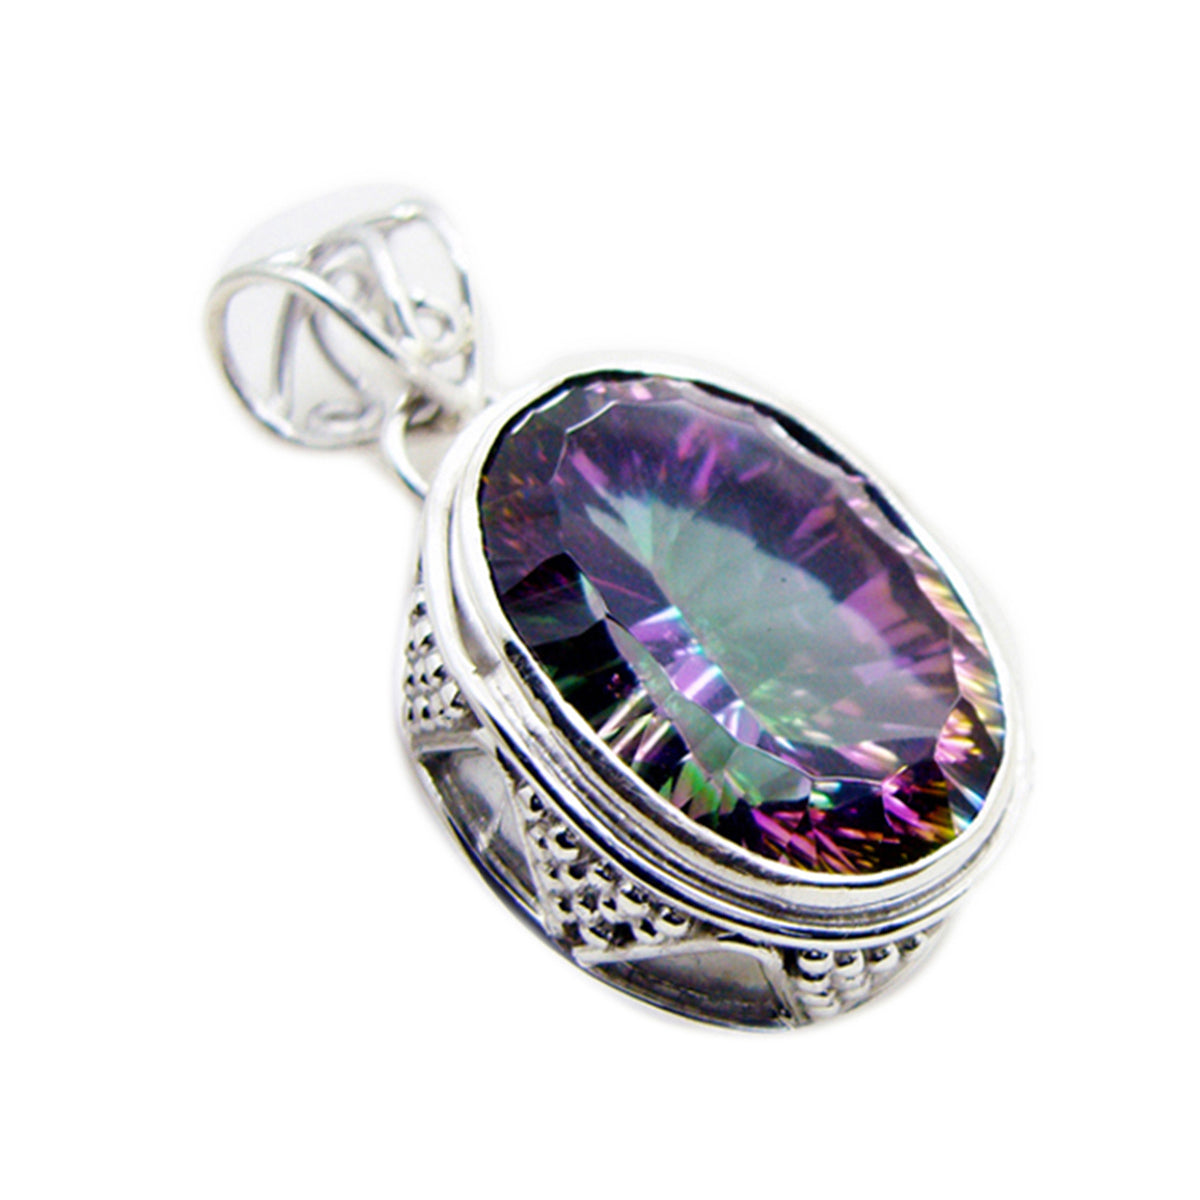 Riyo Genuine Gems Oval Faceted Multi Color Mystic Quartz Solid Silver Pendant Gift For Good Friday